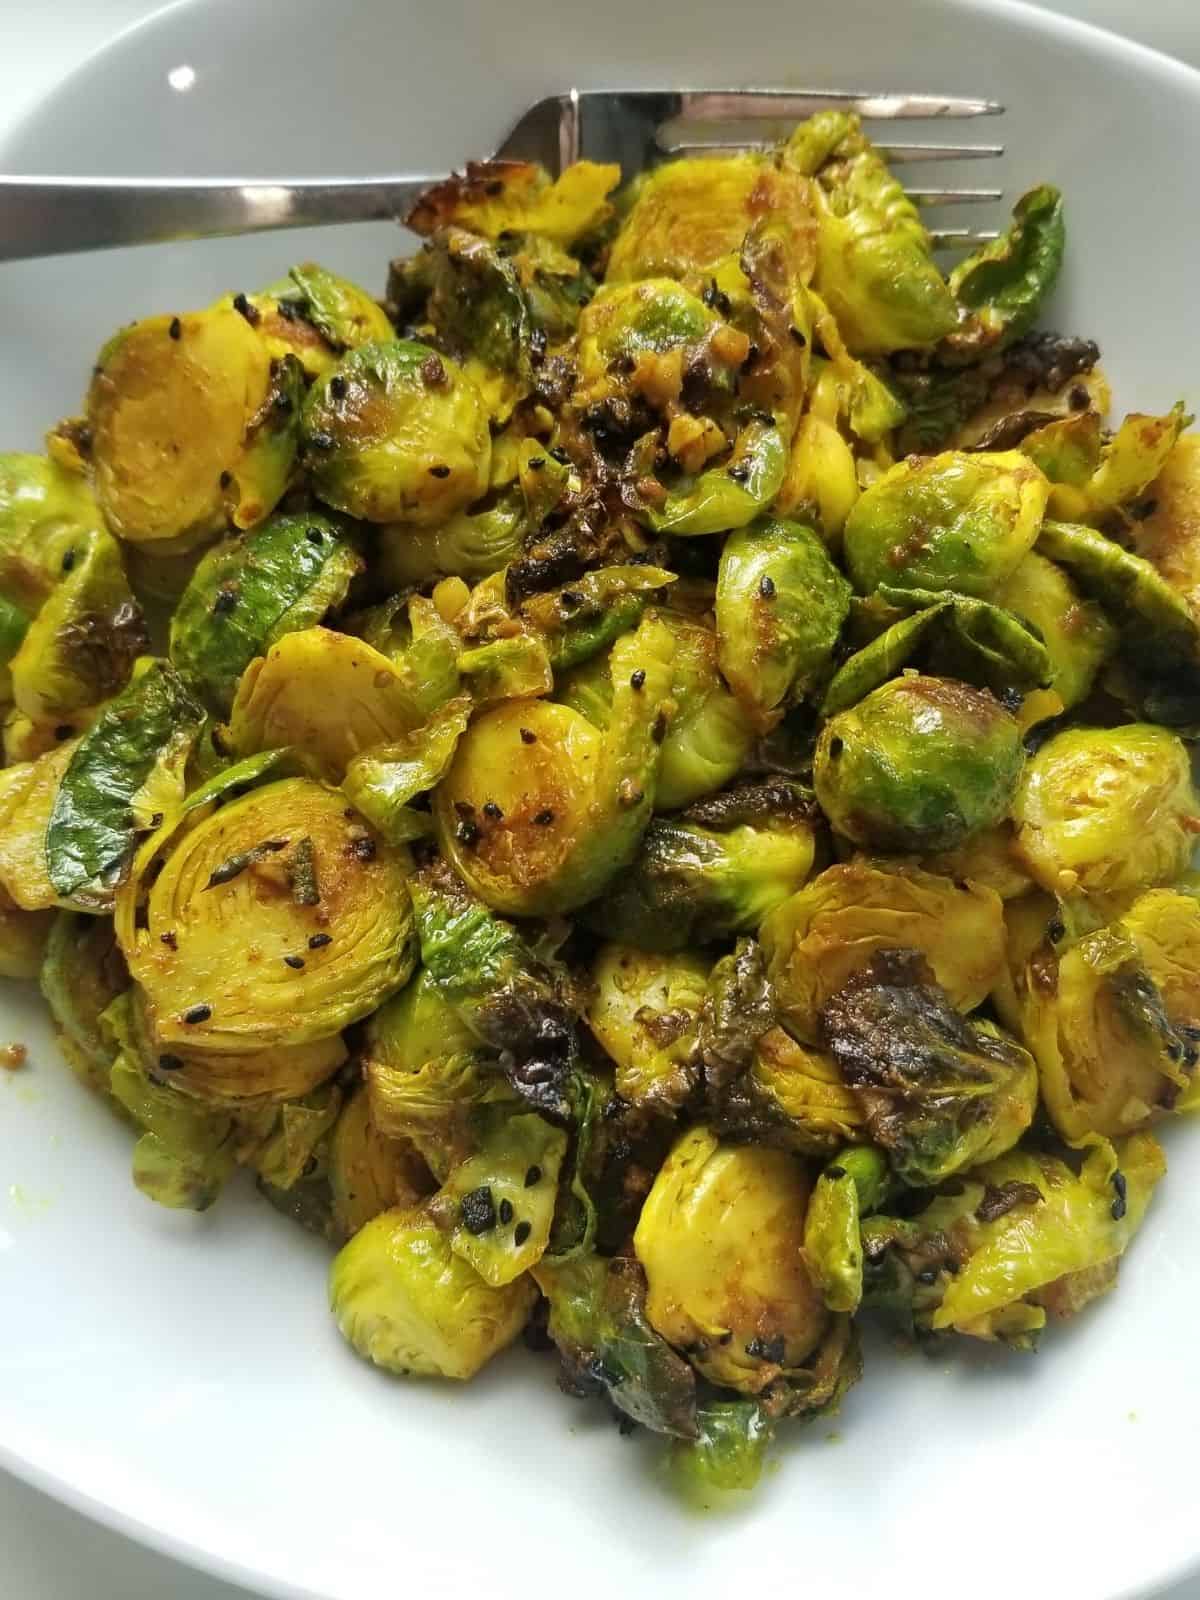 curry-spiced Indian brussels sprouts on a plate.